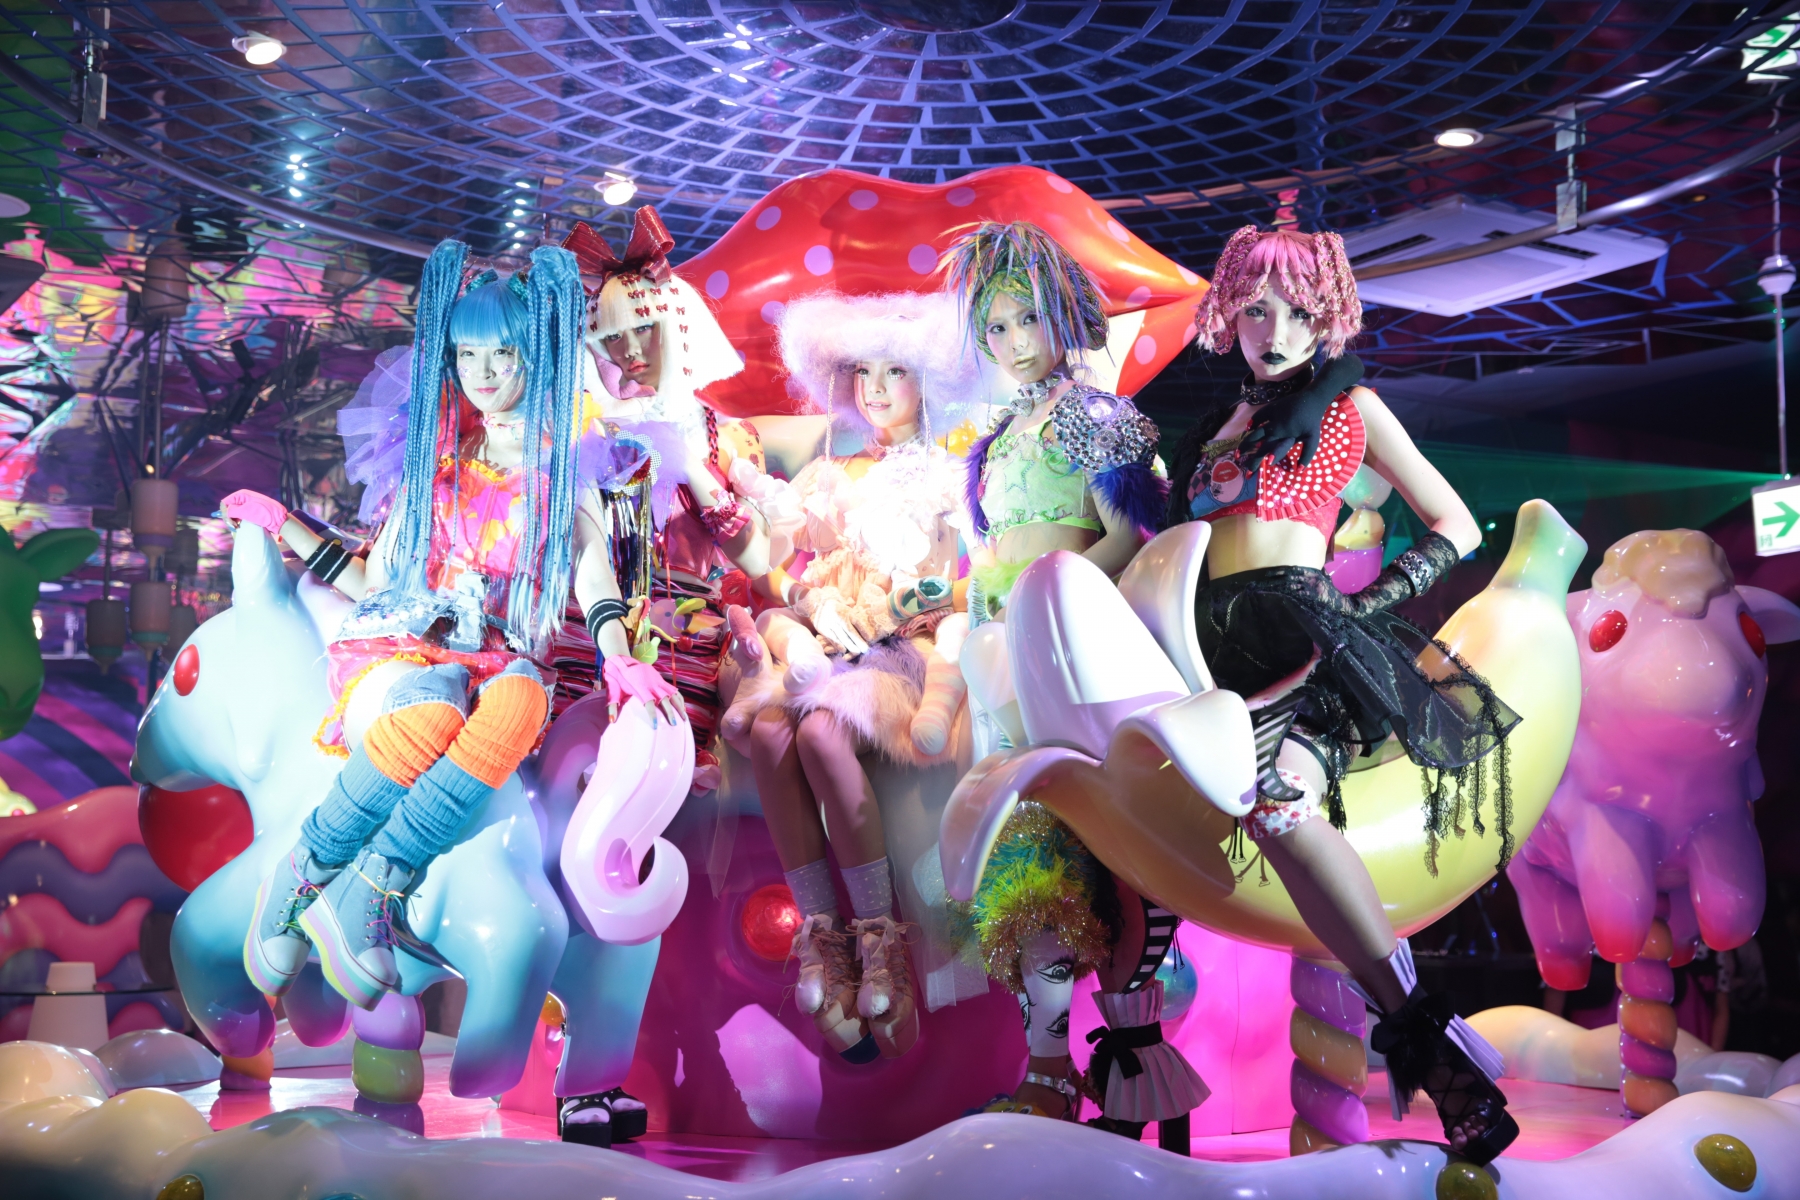 New Tokyo That Nobody Has Seen Yet!  Experience KAWAII MONSTER CAFE in Harajuku